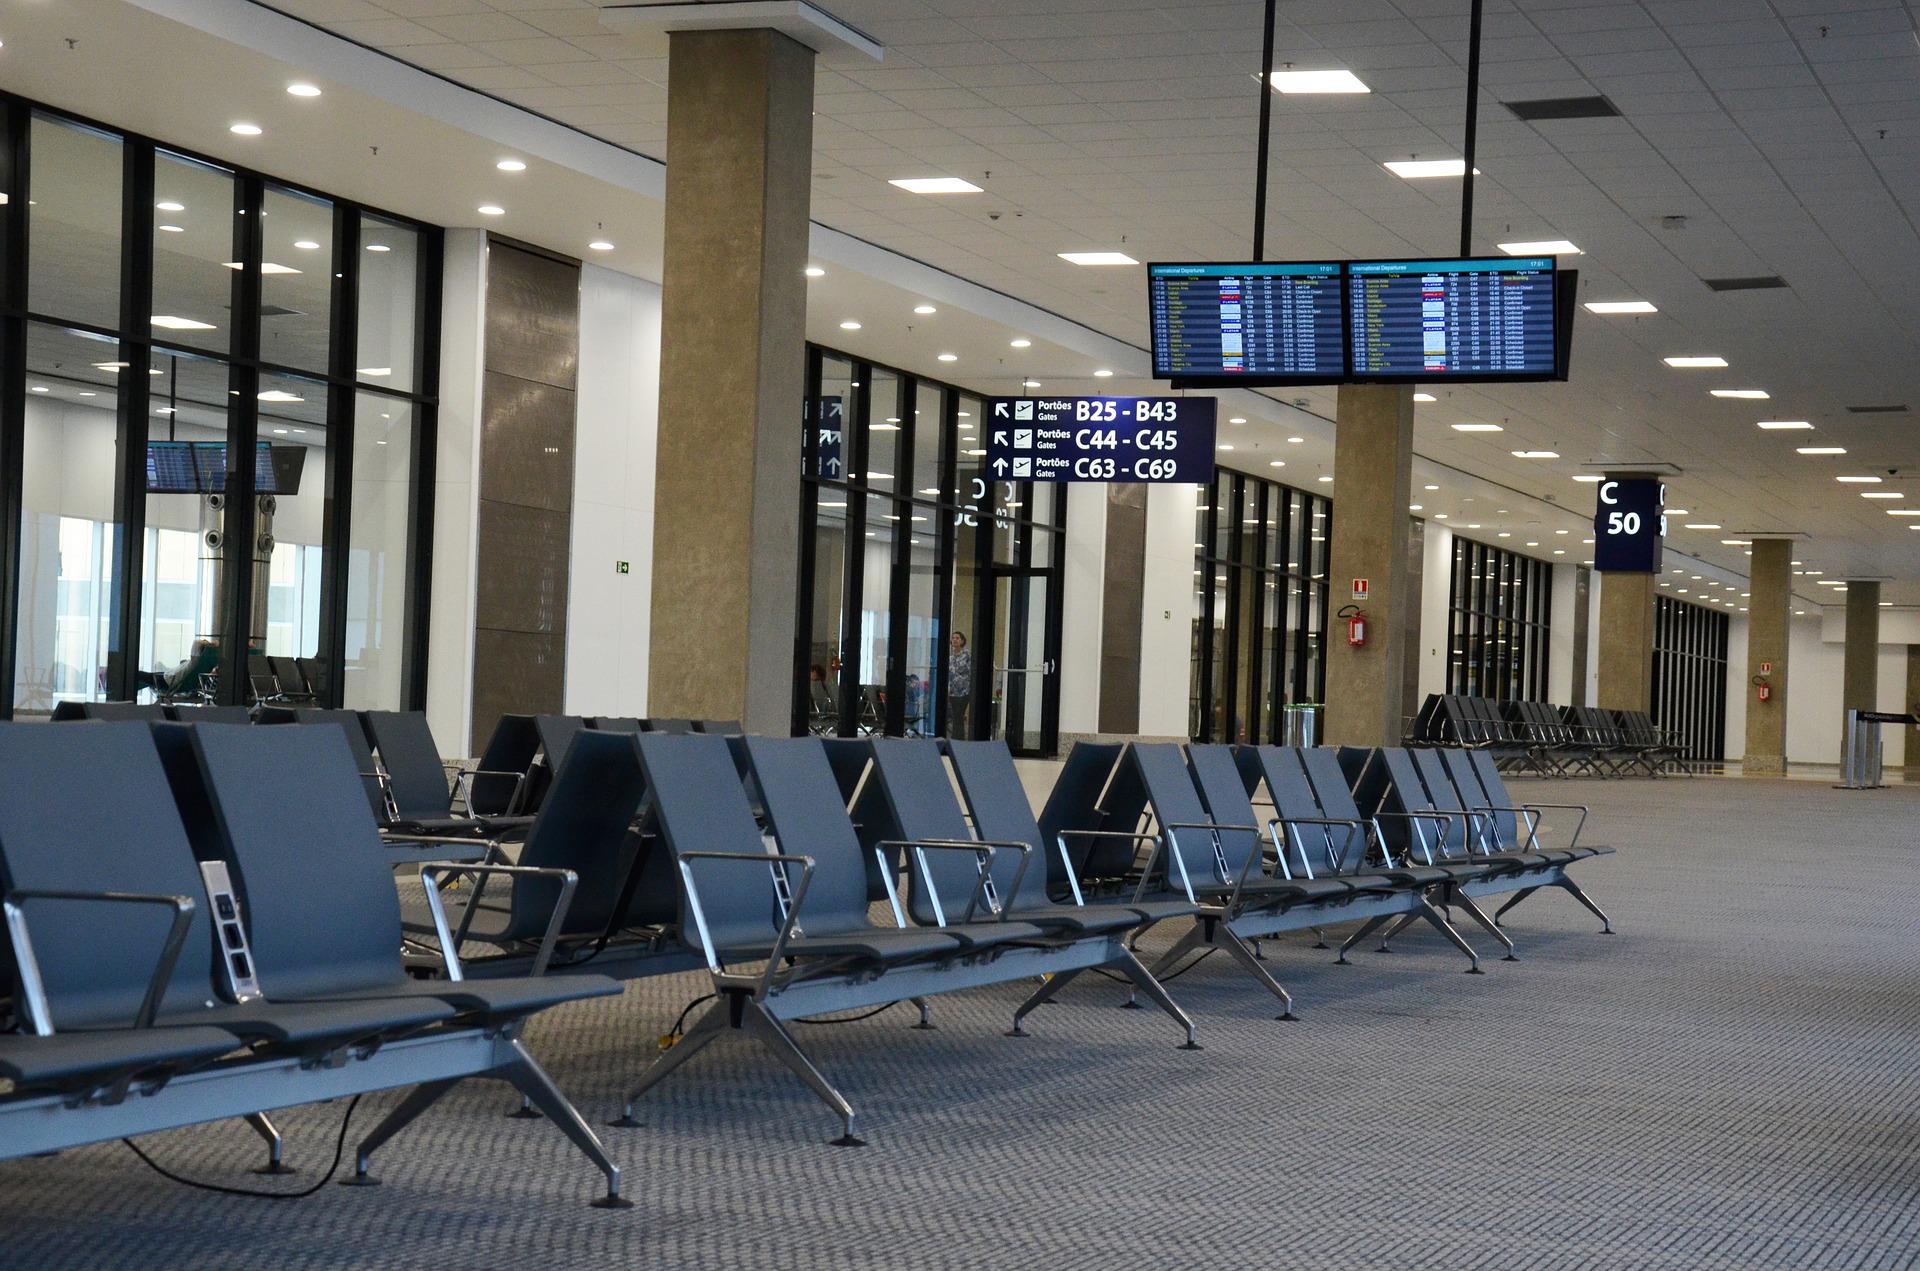 A night in an airport creates additional sleep challenges. (Pixabay photo)